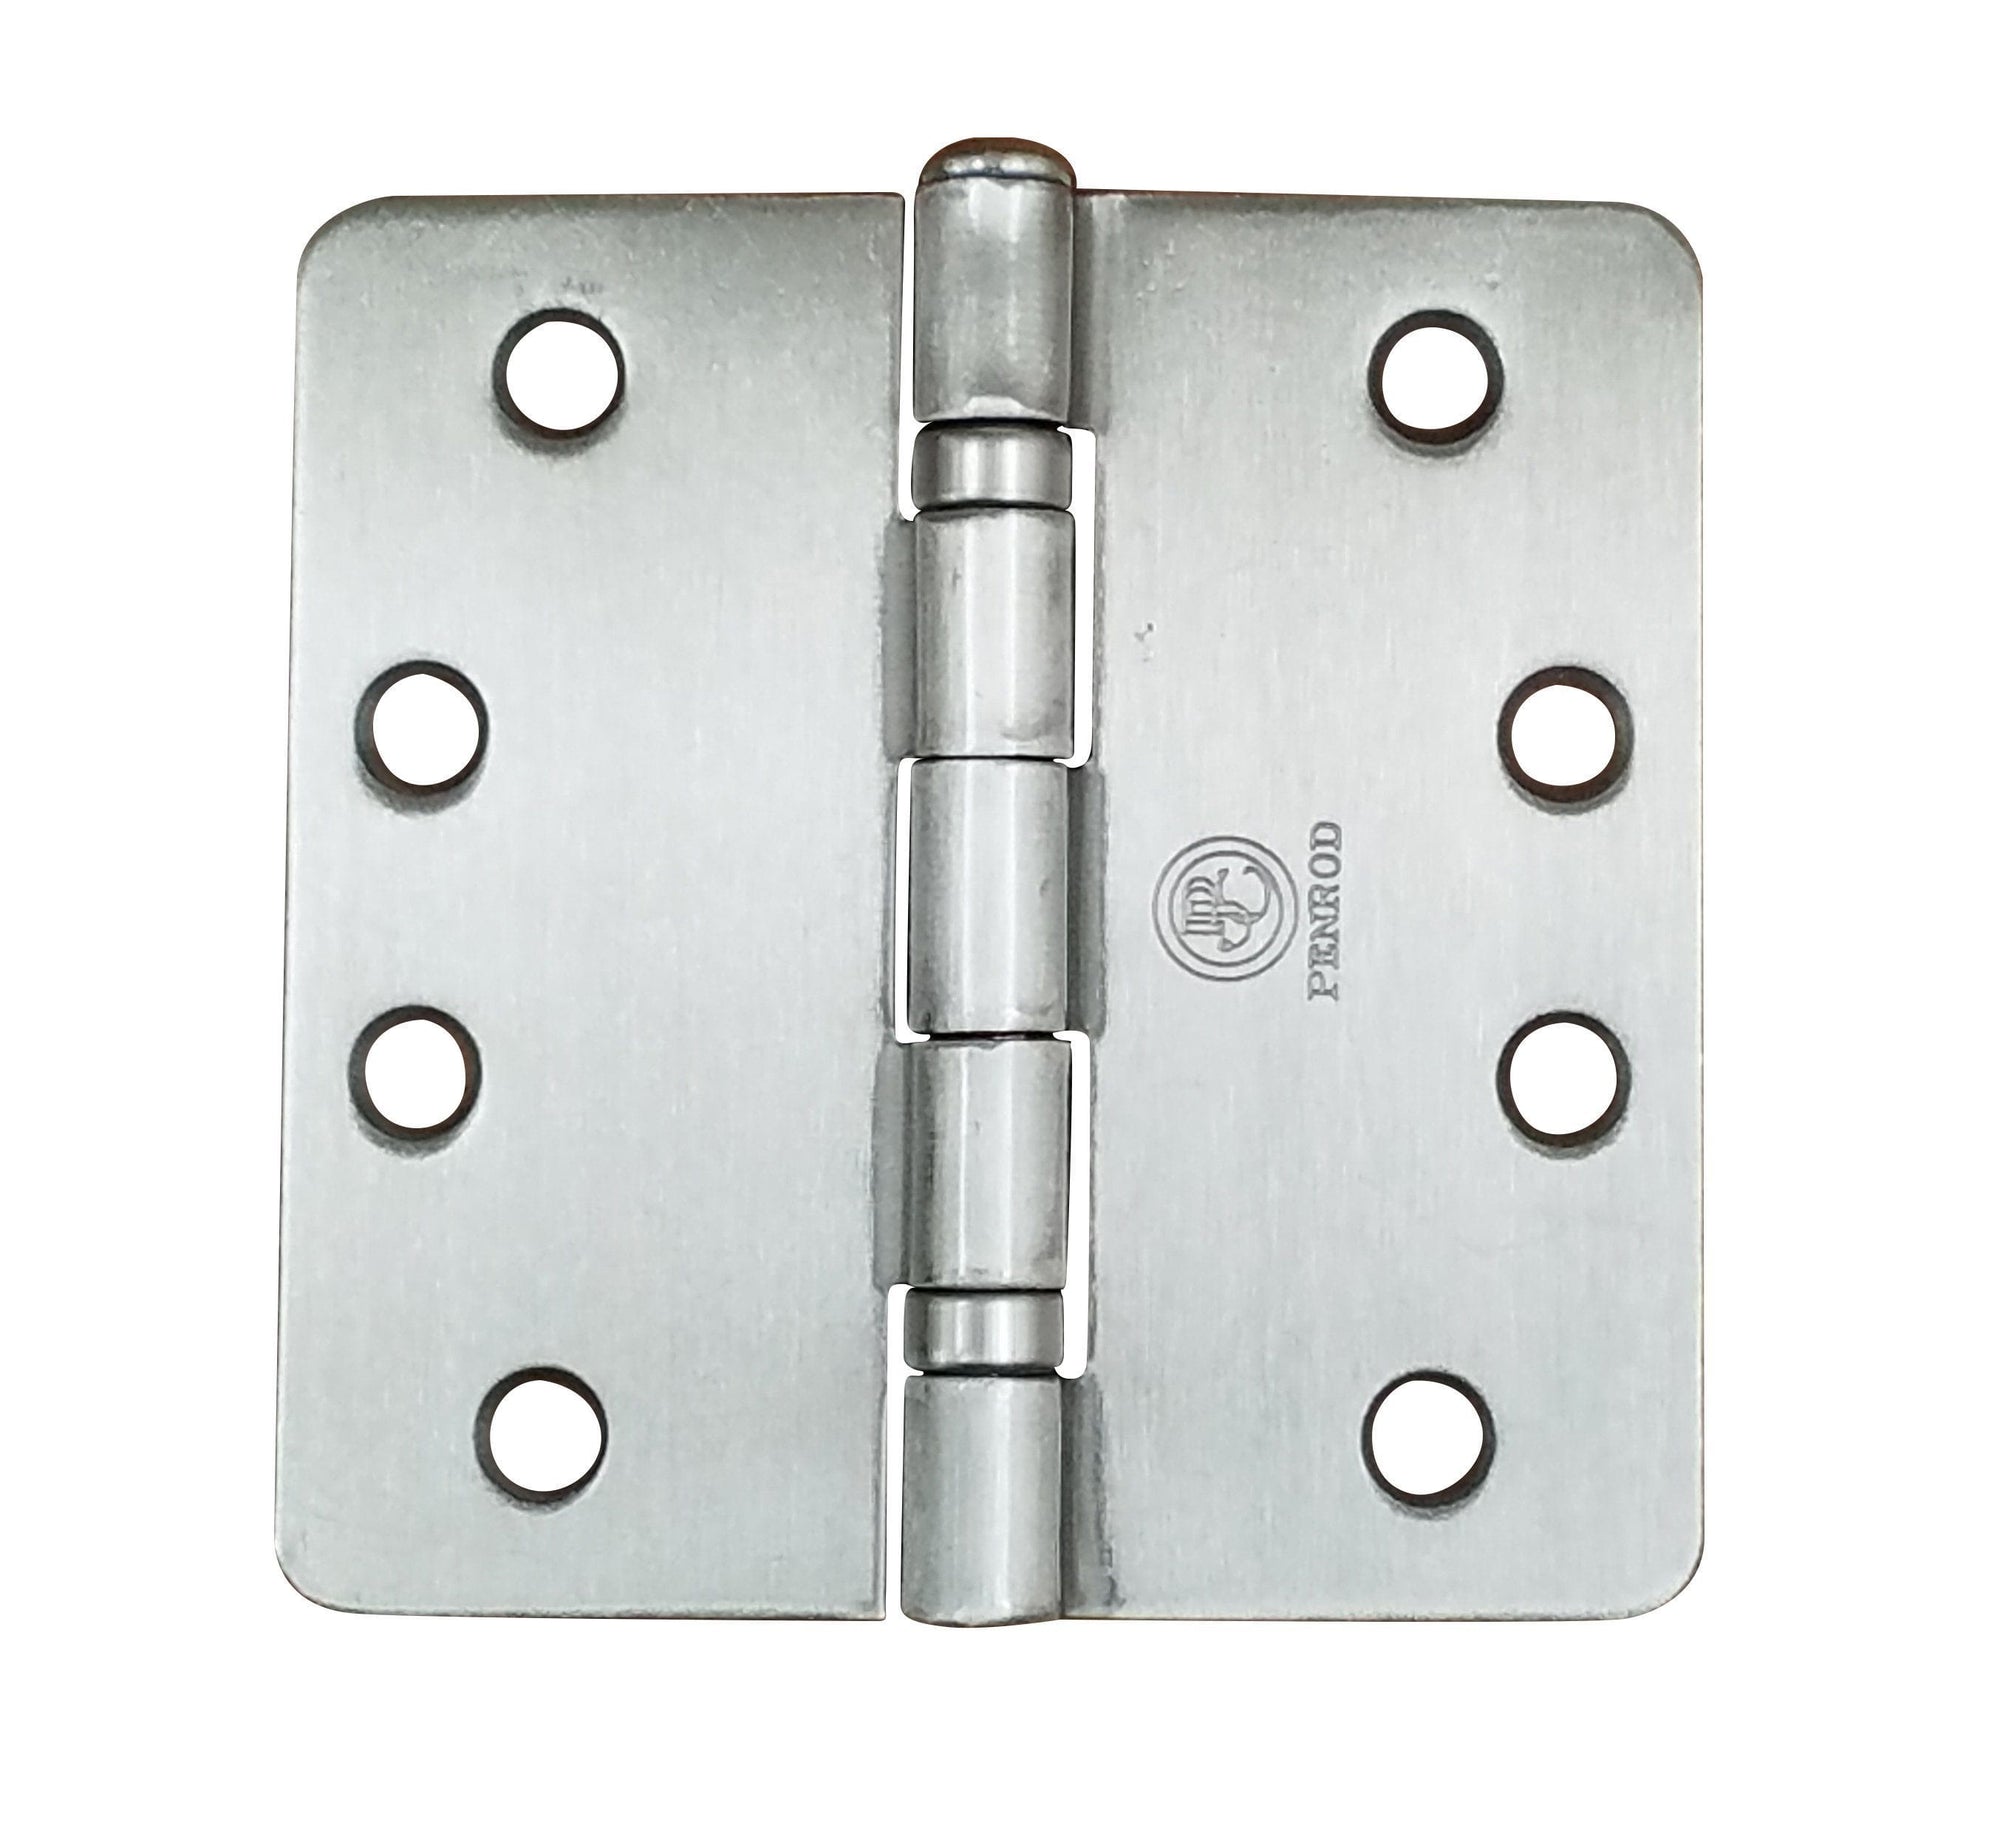 Residential Ball Bearing Hinges - Ball Bearing Door Hinges - 4" With 1/4" Radius Corners  - Template Timely Arch Hole Pattern - Multiple Finishes - 3 Pack